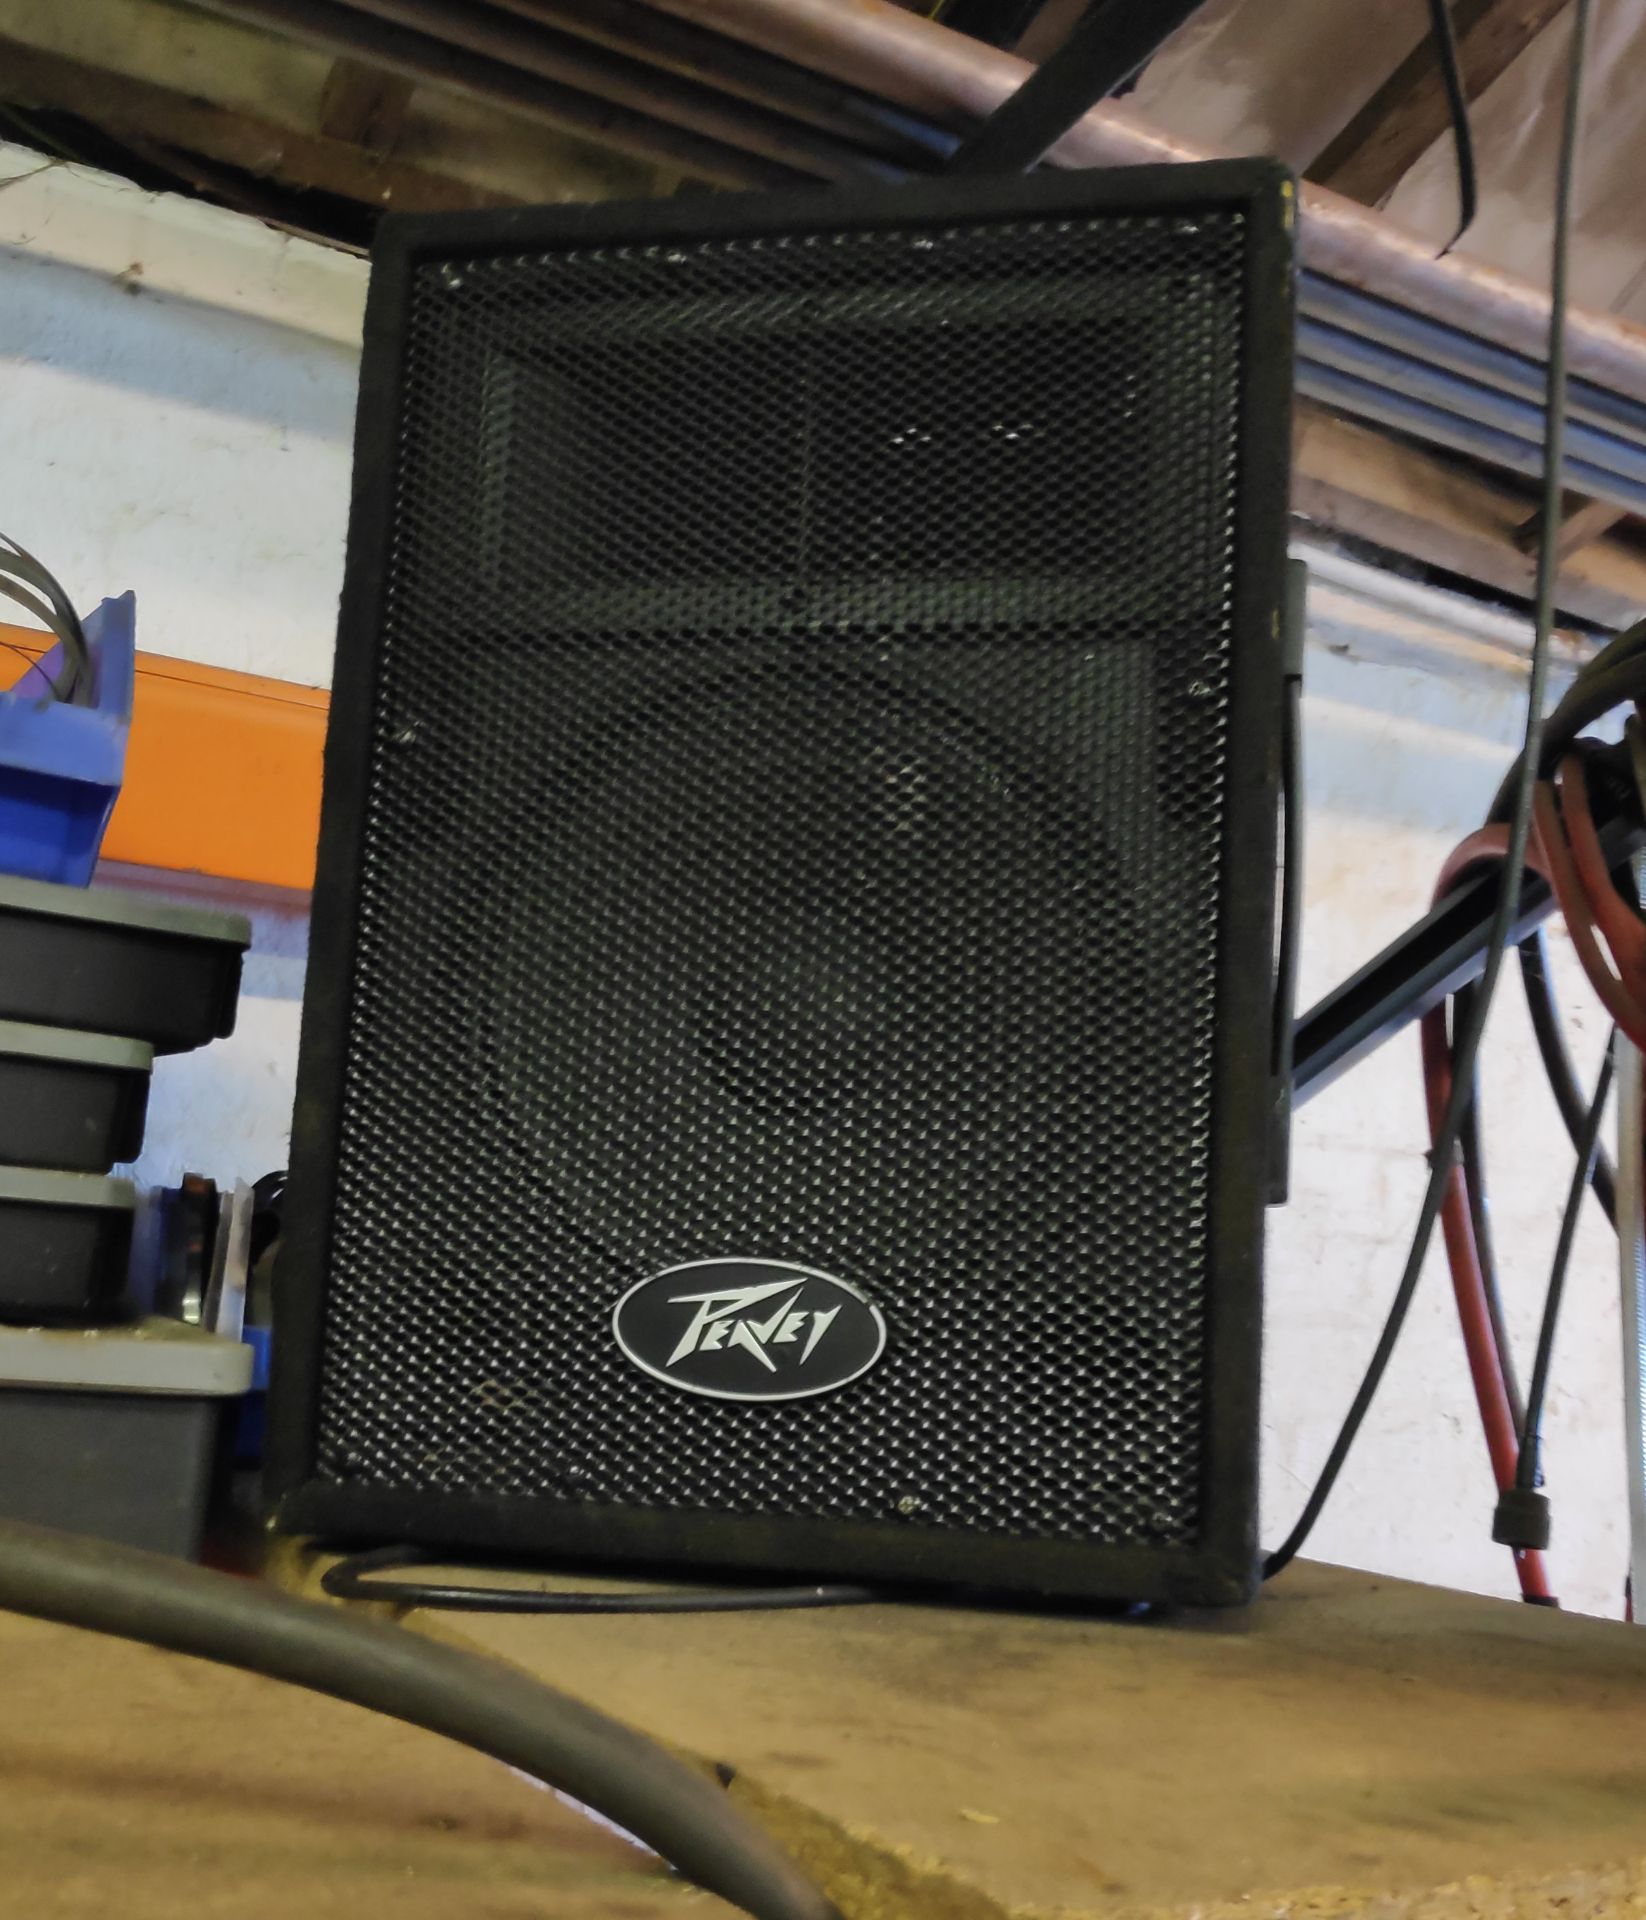 Peavey PVi4B 4-Channel Powered Mixer, 2 x Peavey Speakers And Speaker Stand - CL682 - Location: - Image 4 of 6